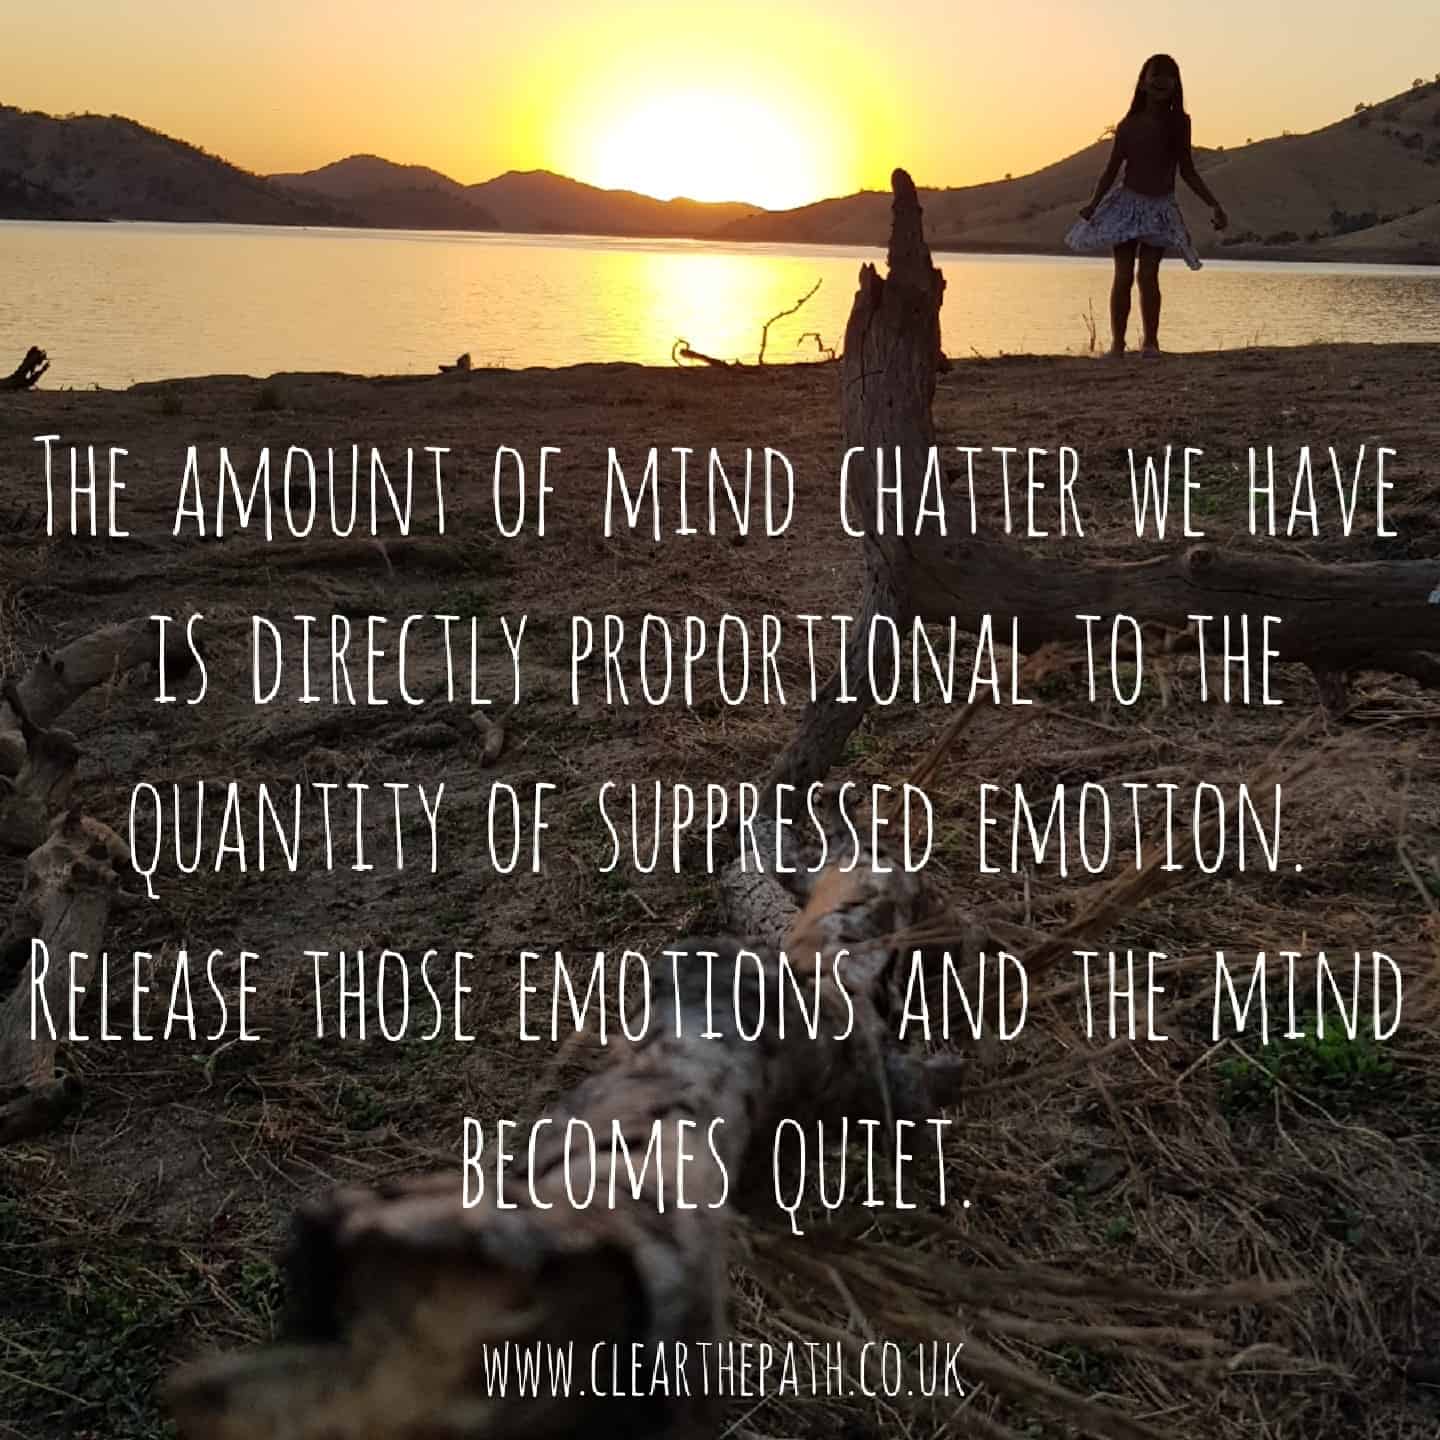 The amount of mind chatter we have is directly proportional to the quantity of suppressed emotion. Release those emotions and the mind becomes quiet.